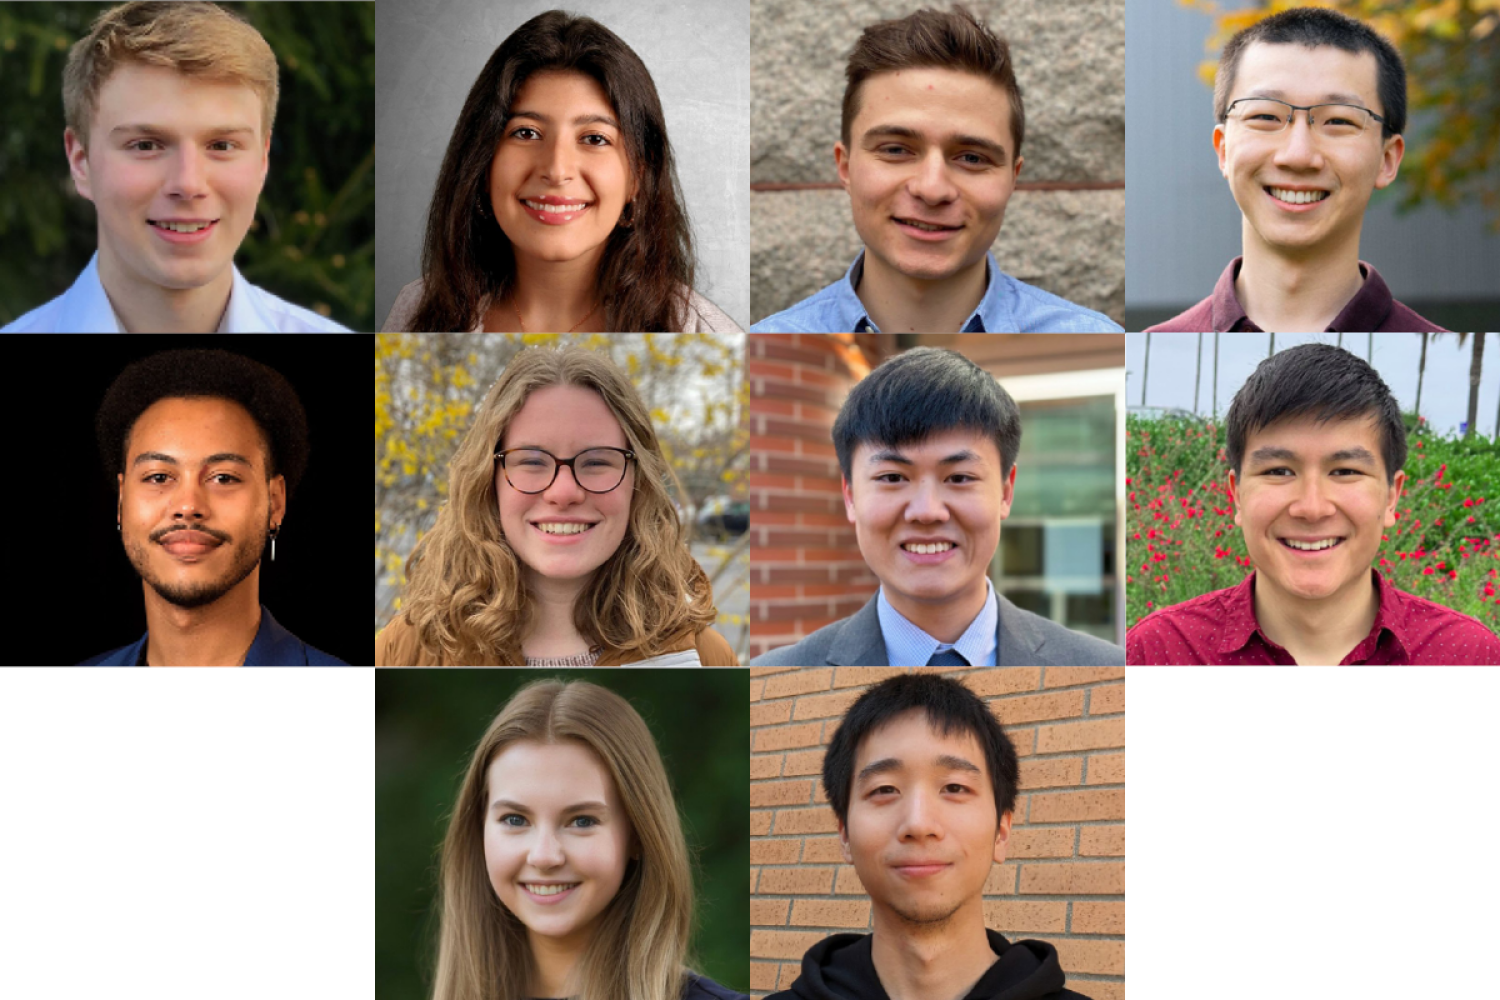 Top row from left to right: Owen Dugan ’24, Kaylie Hausknecht, Elijah Lew-Smith, and Rupert Li ’24. Middle row from left to right: Amani Maina-Kilaas, Zoë Marschner ’23, Zijian (William) Niu, and James Roney. Bottom row: Anna Sappington ’19 (left) and Jason Yang ’22.